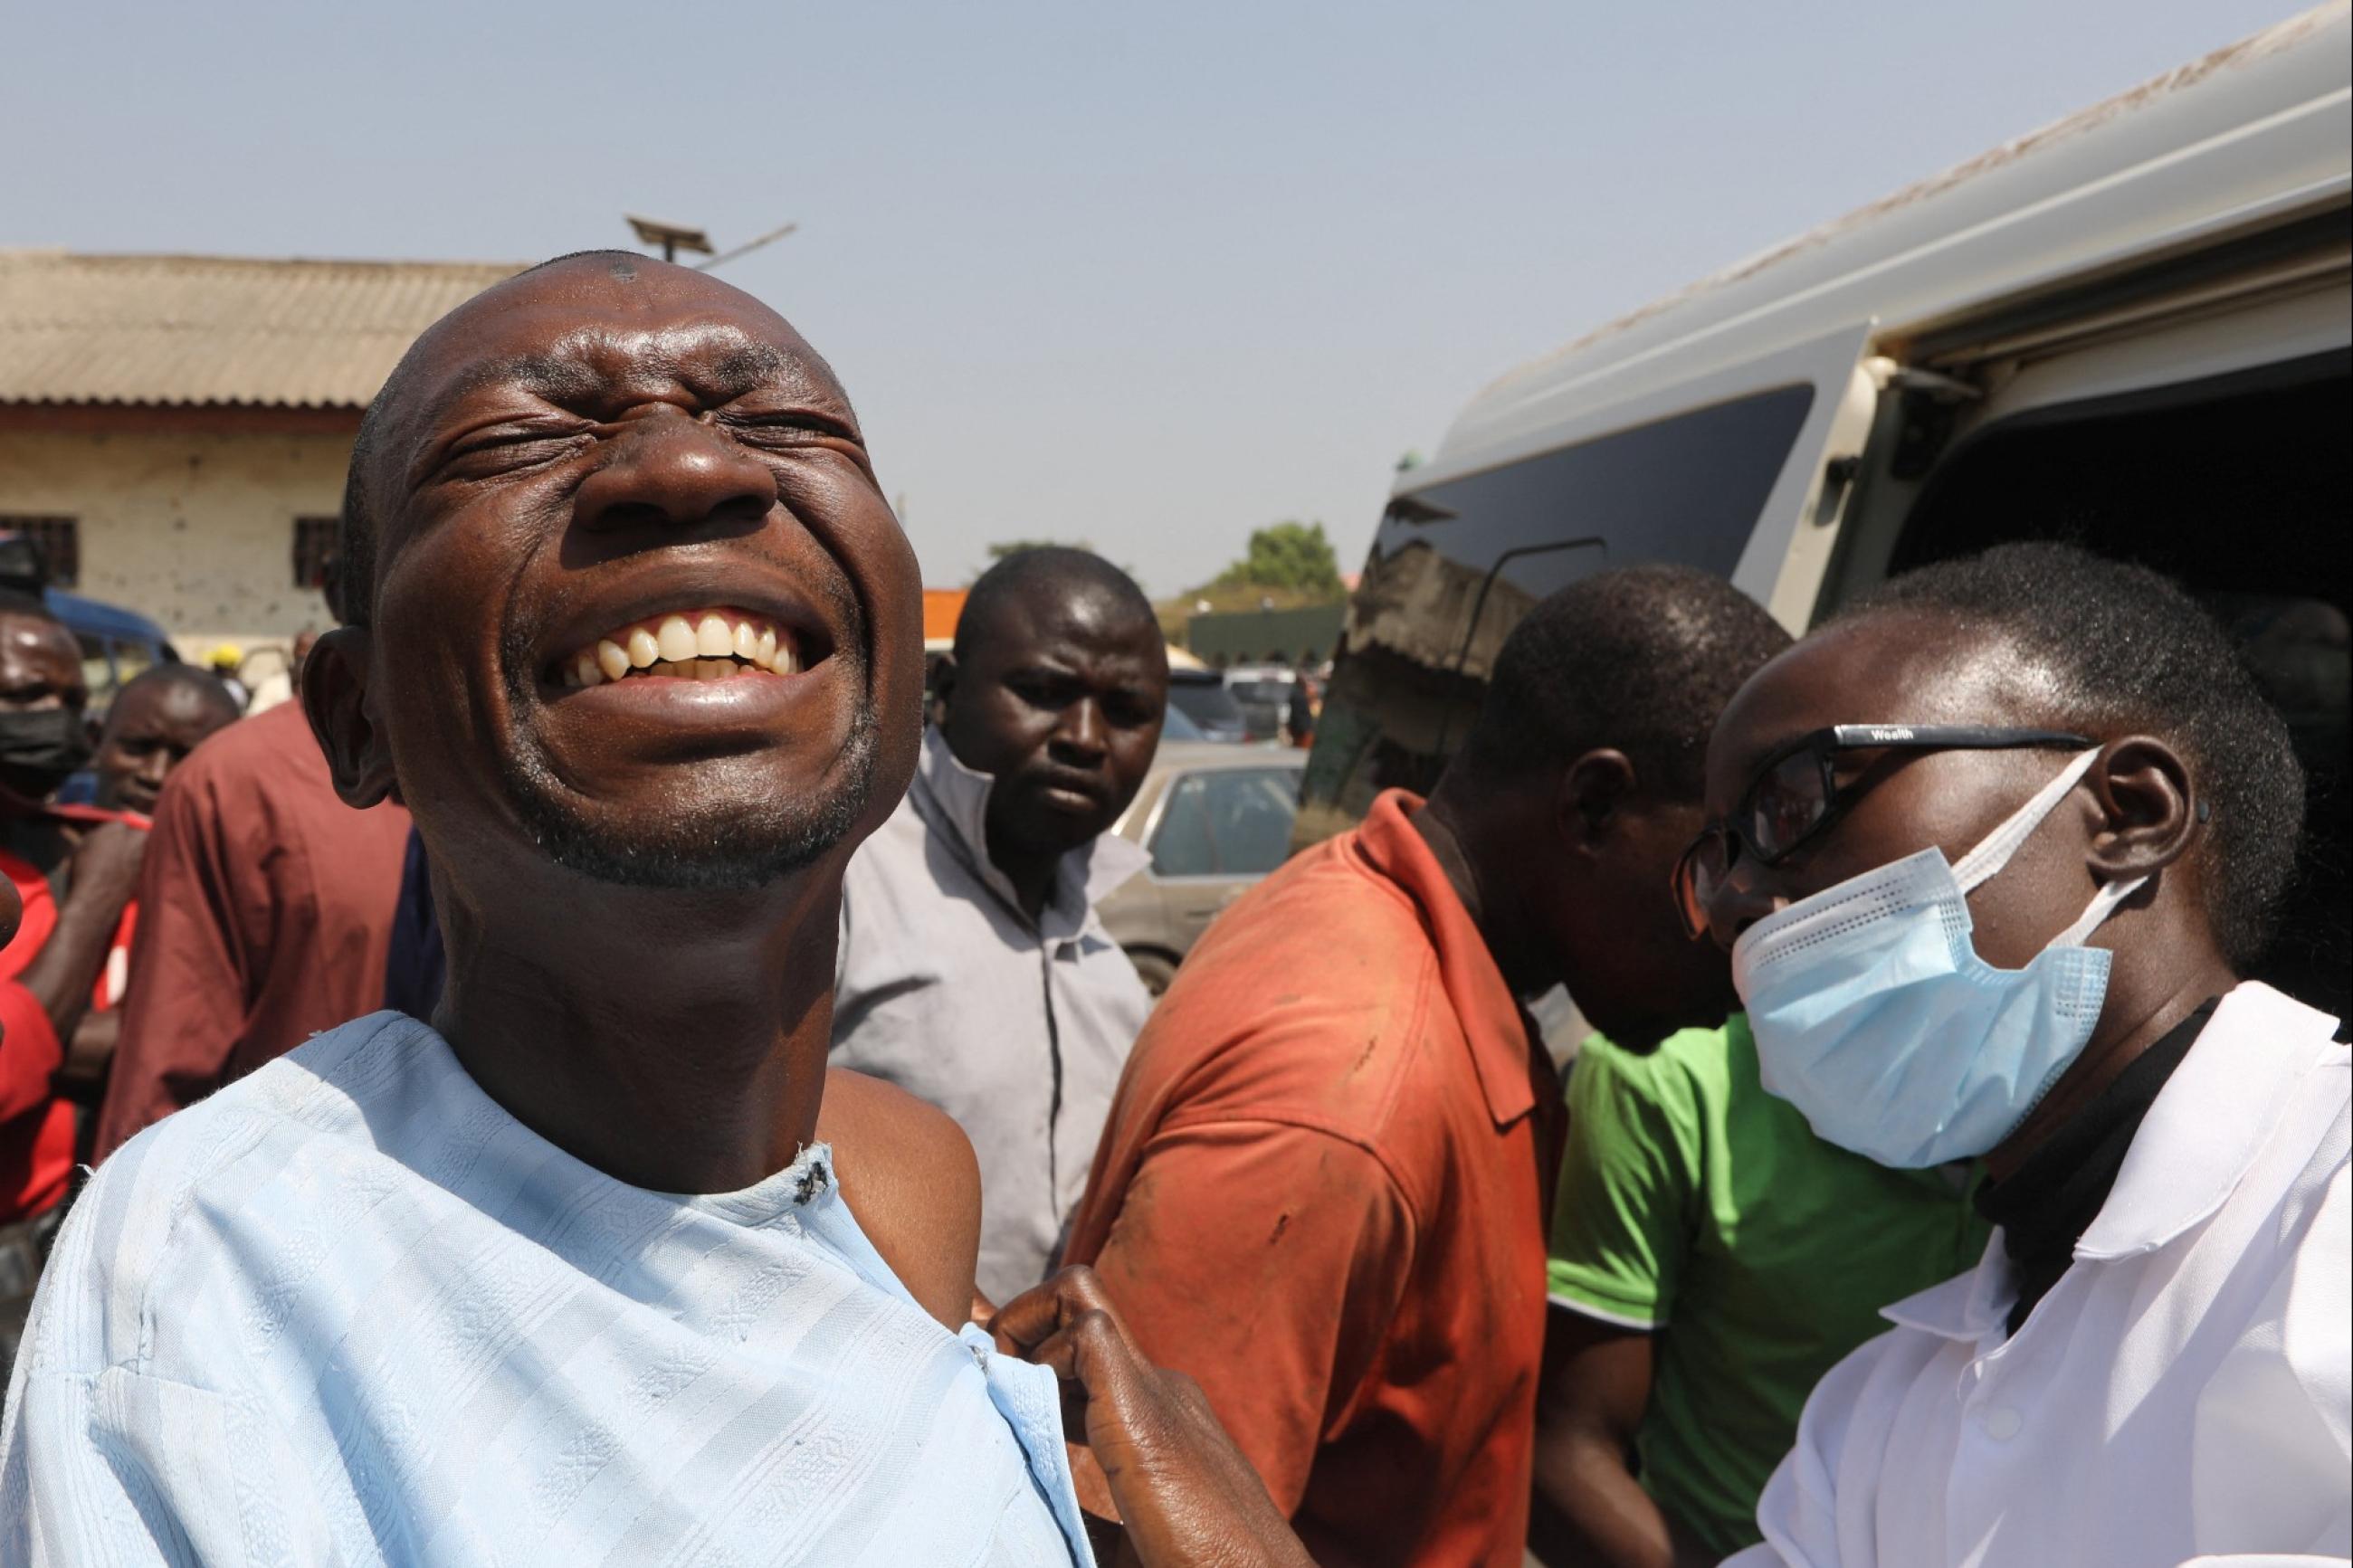 A man receives a dose of COVID-19 vaccine, during a mass vaccination exercise at Wuse market in Abuja, Nigeria, on January 26, 2022.